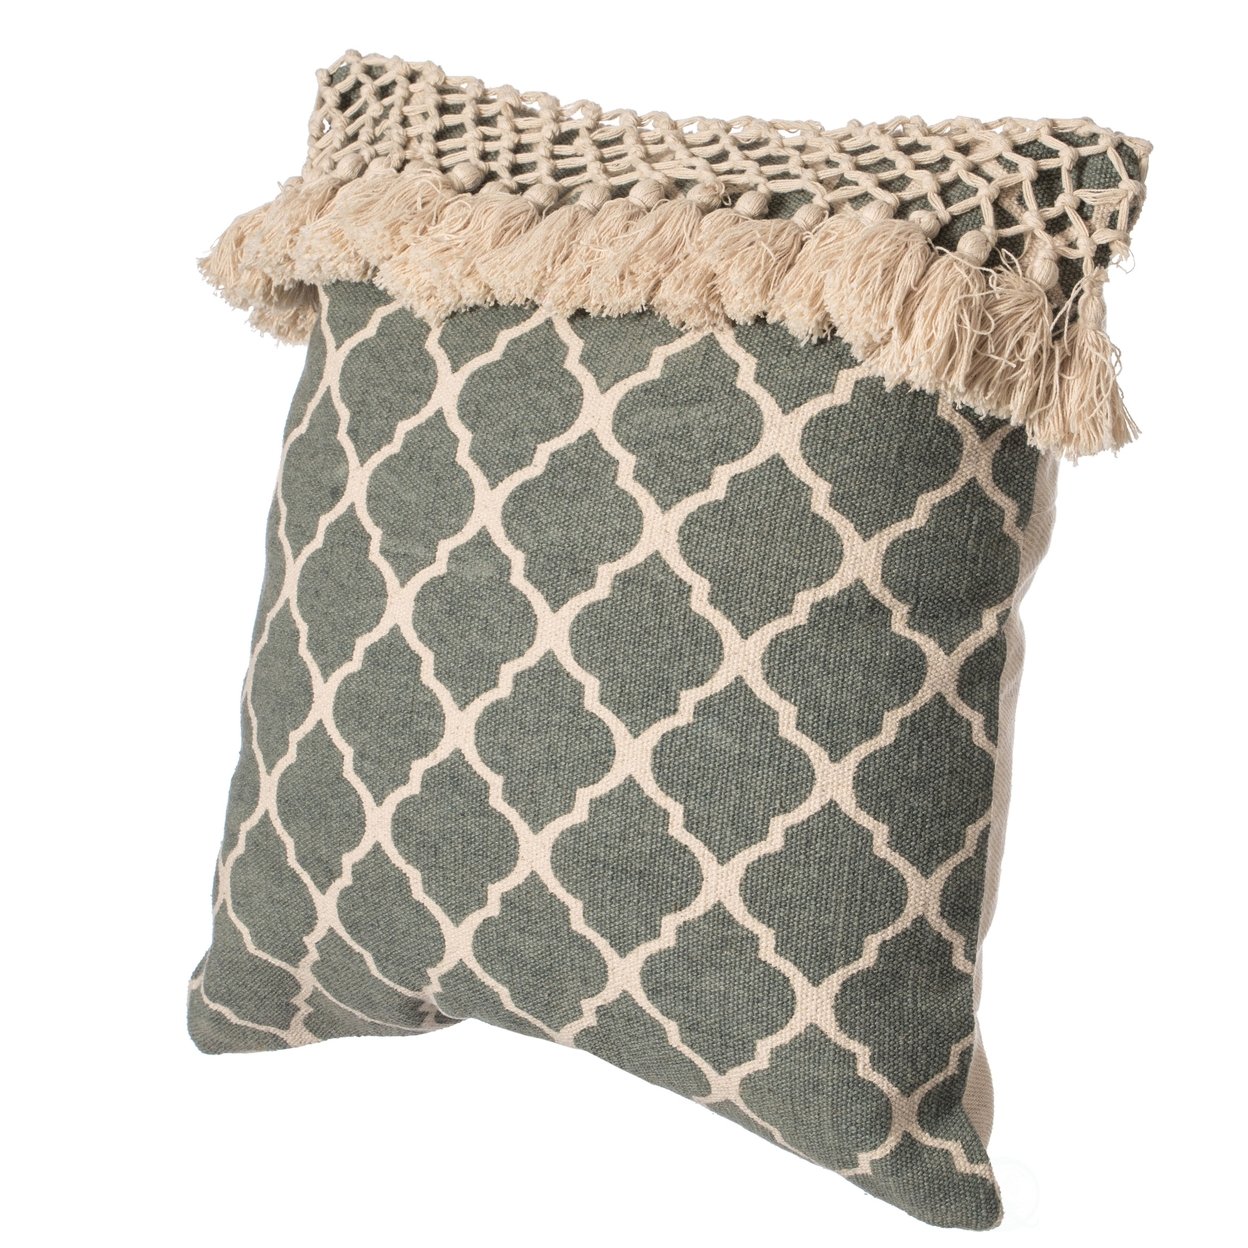 16 Handwoven Cotton Throw Pillow Cover With Ogee Pattern And Tasseled Top - Green With Cushion